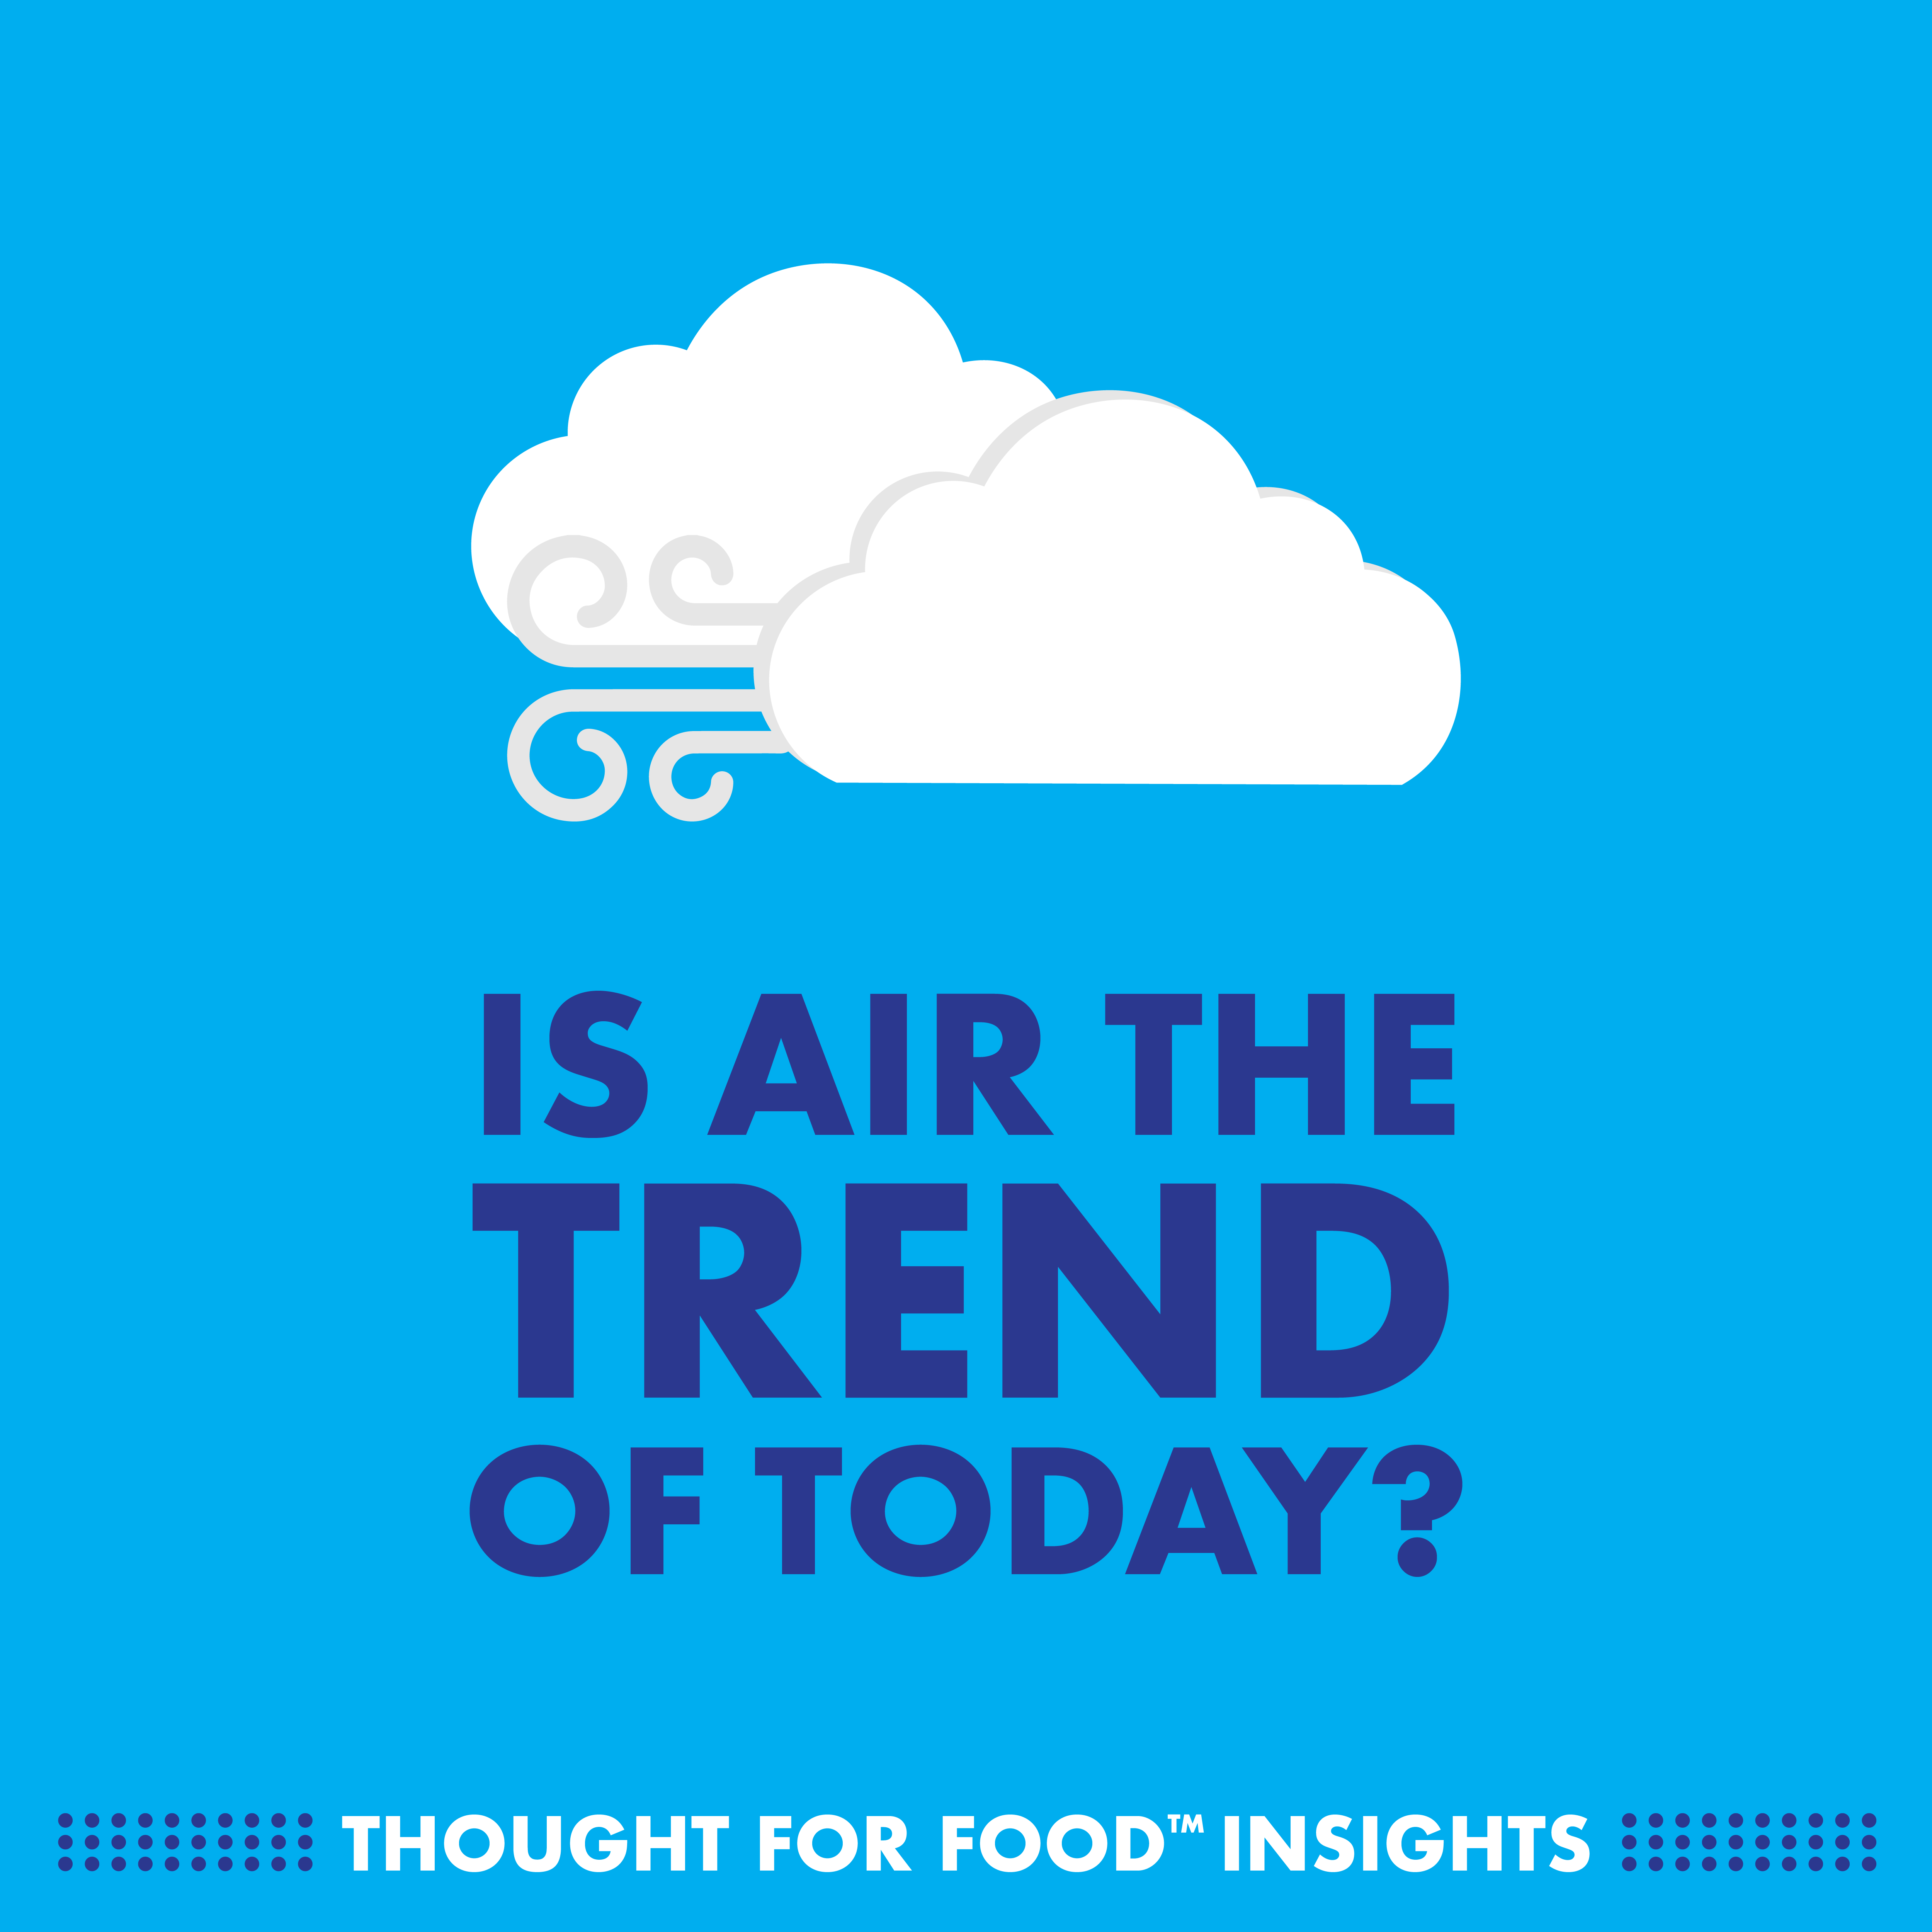 Is air the trend of today?